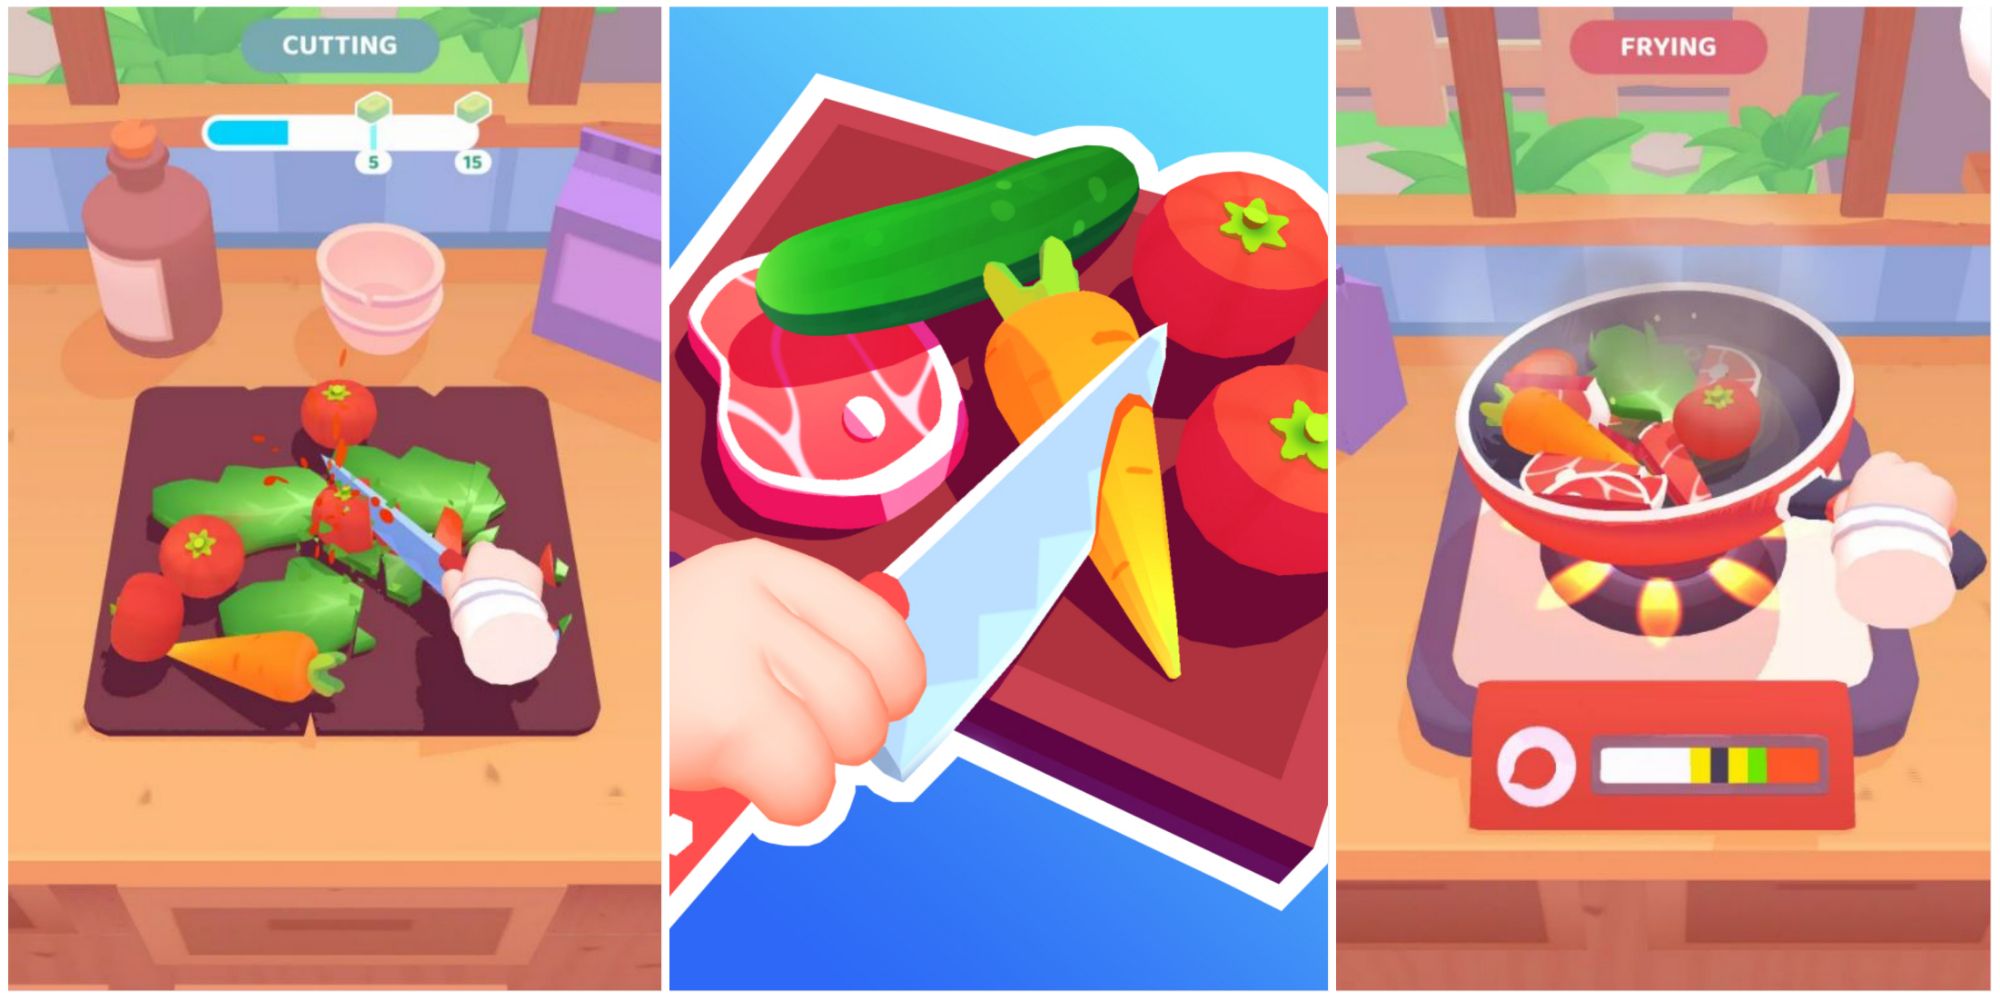 A split image of a hand cutting veggies on a board, an icon of a knife cutting carrot on a board, and a hand frying meat and veggies in a pan